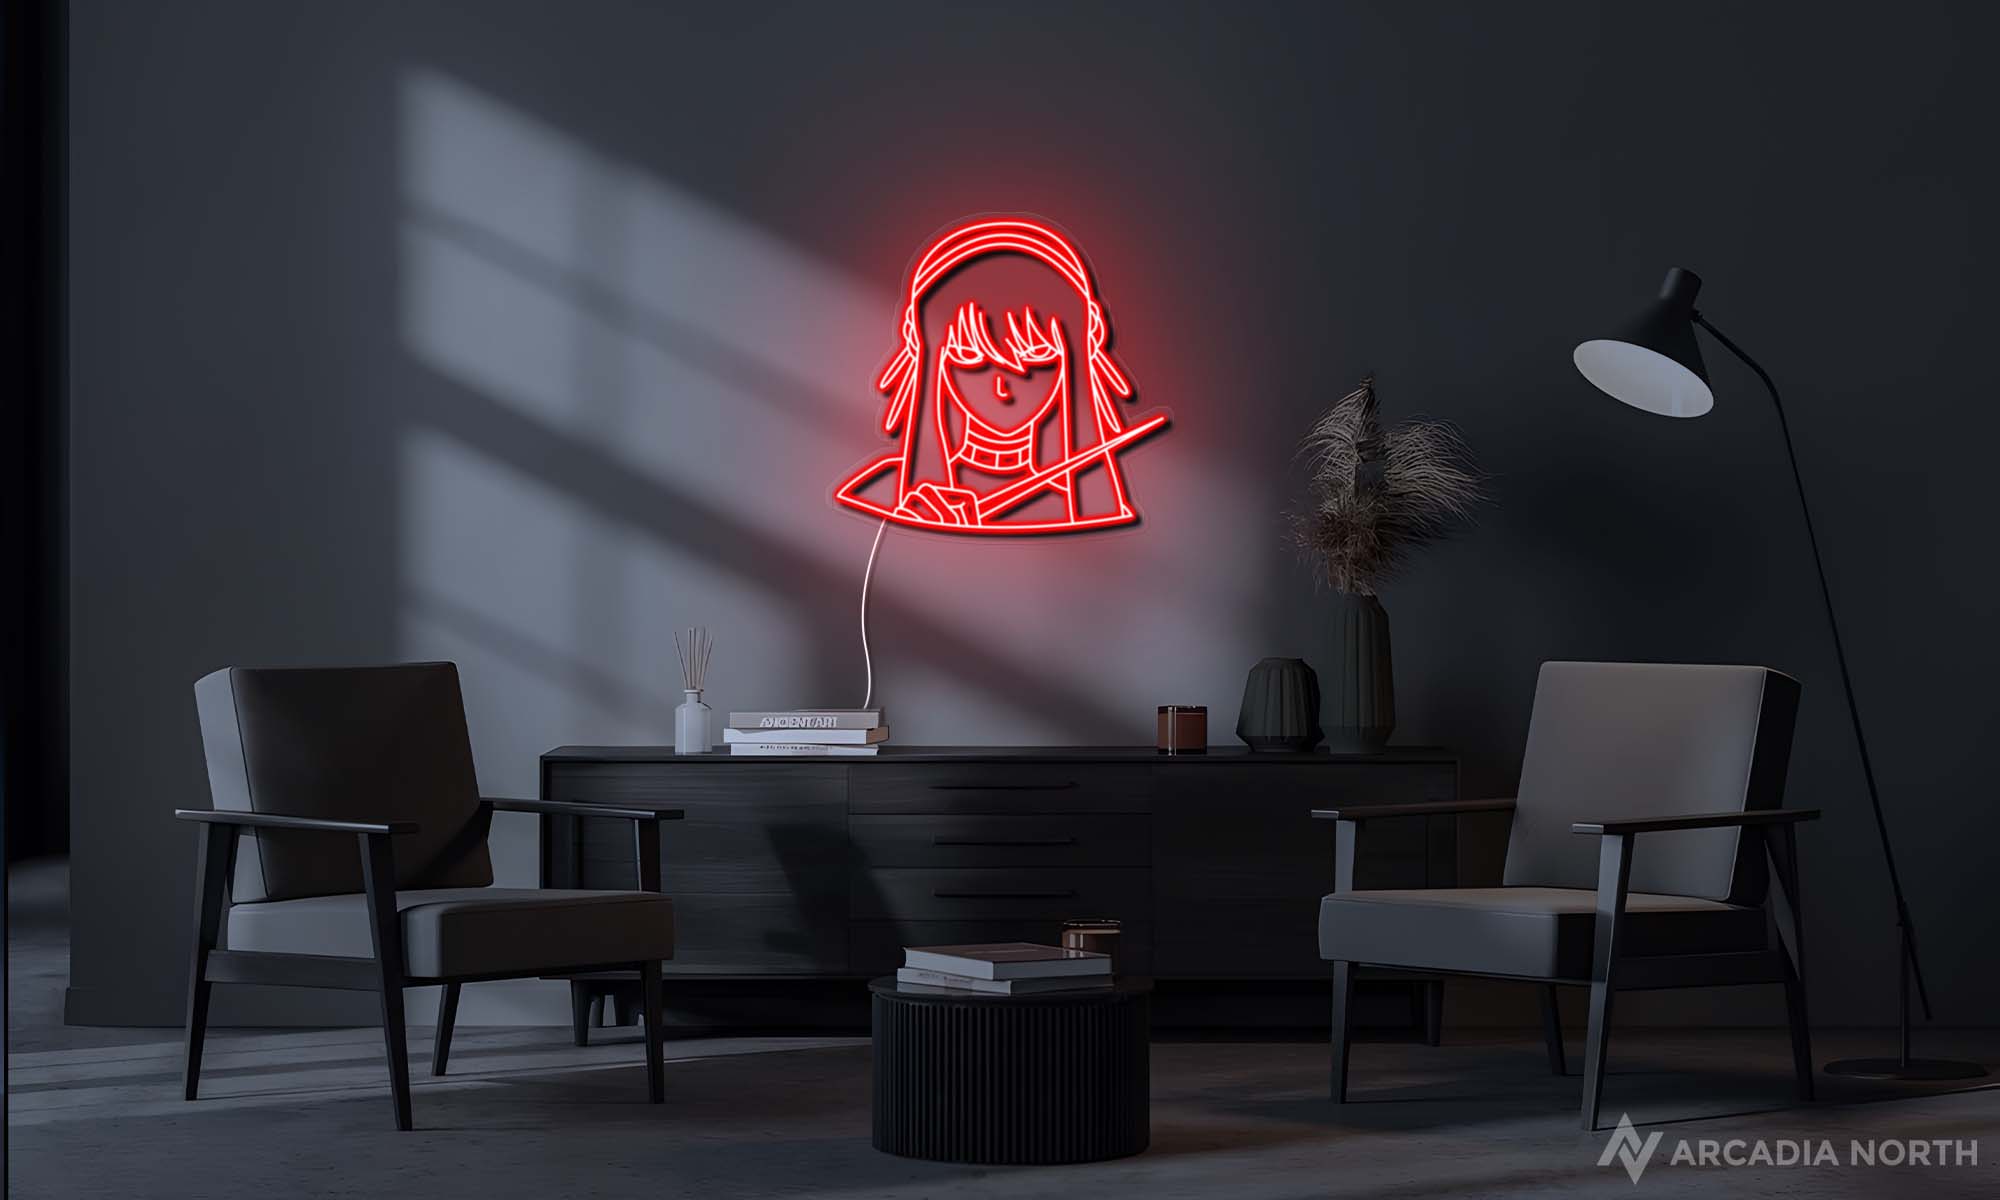 Modern living room with a red Spy x Family anime Yor Forger neon sign glowing on the wall